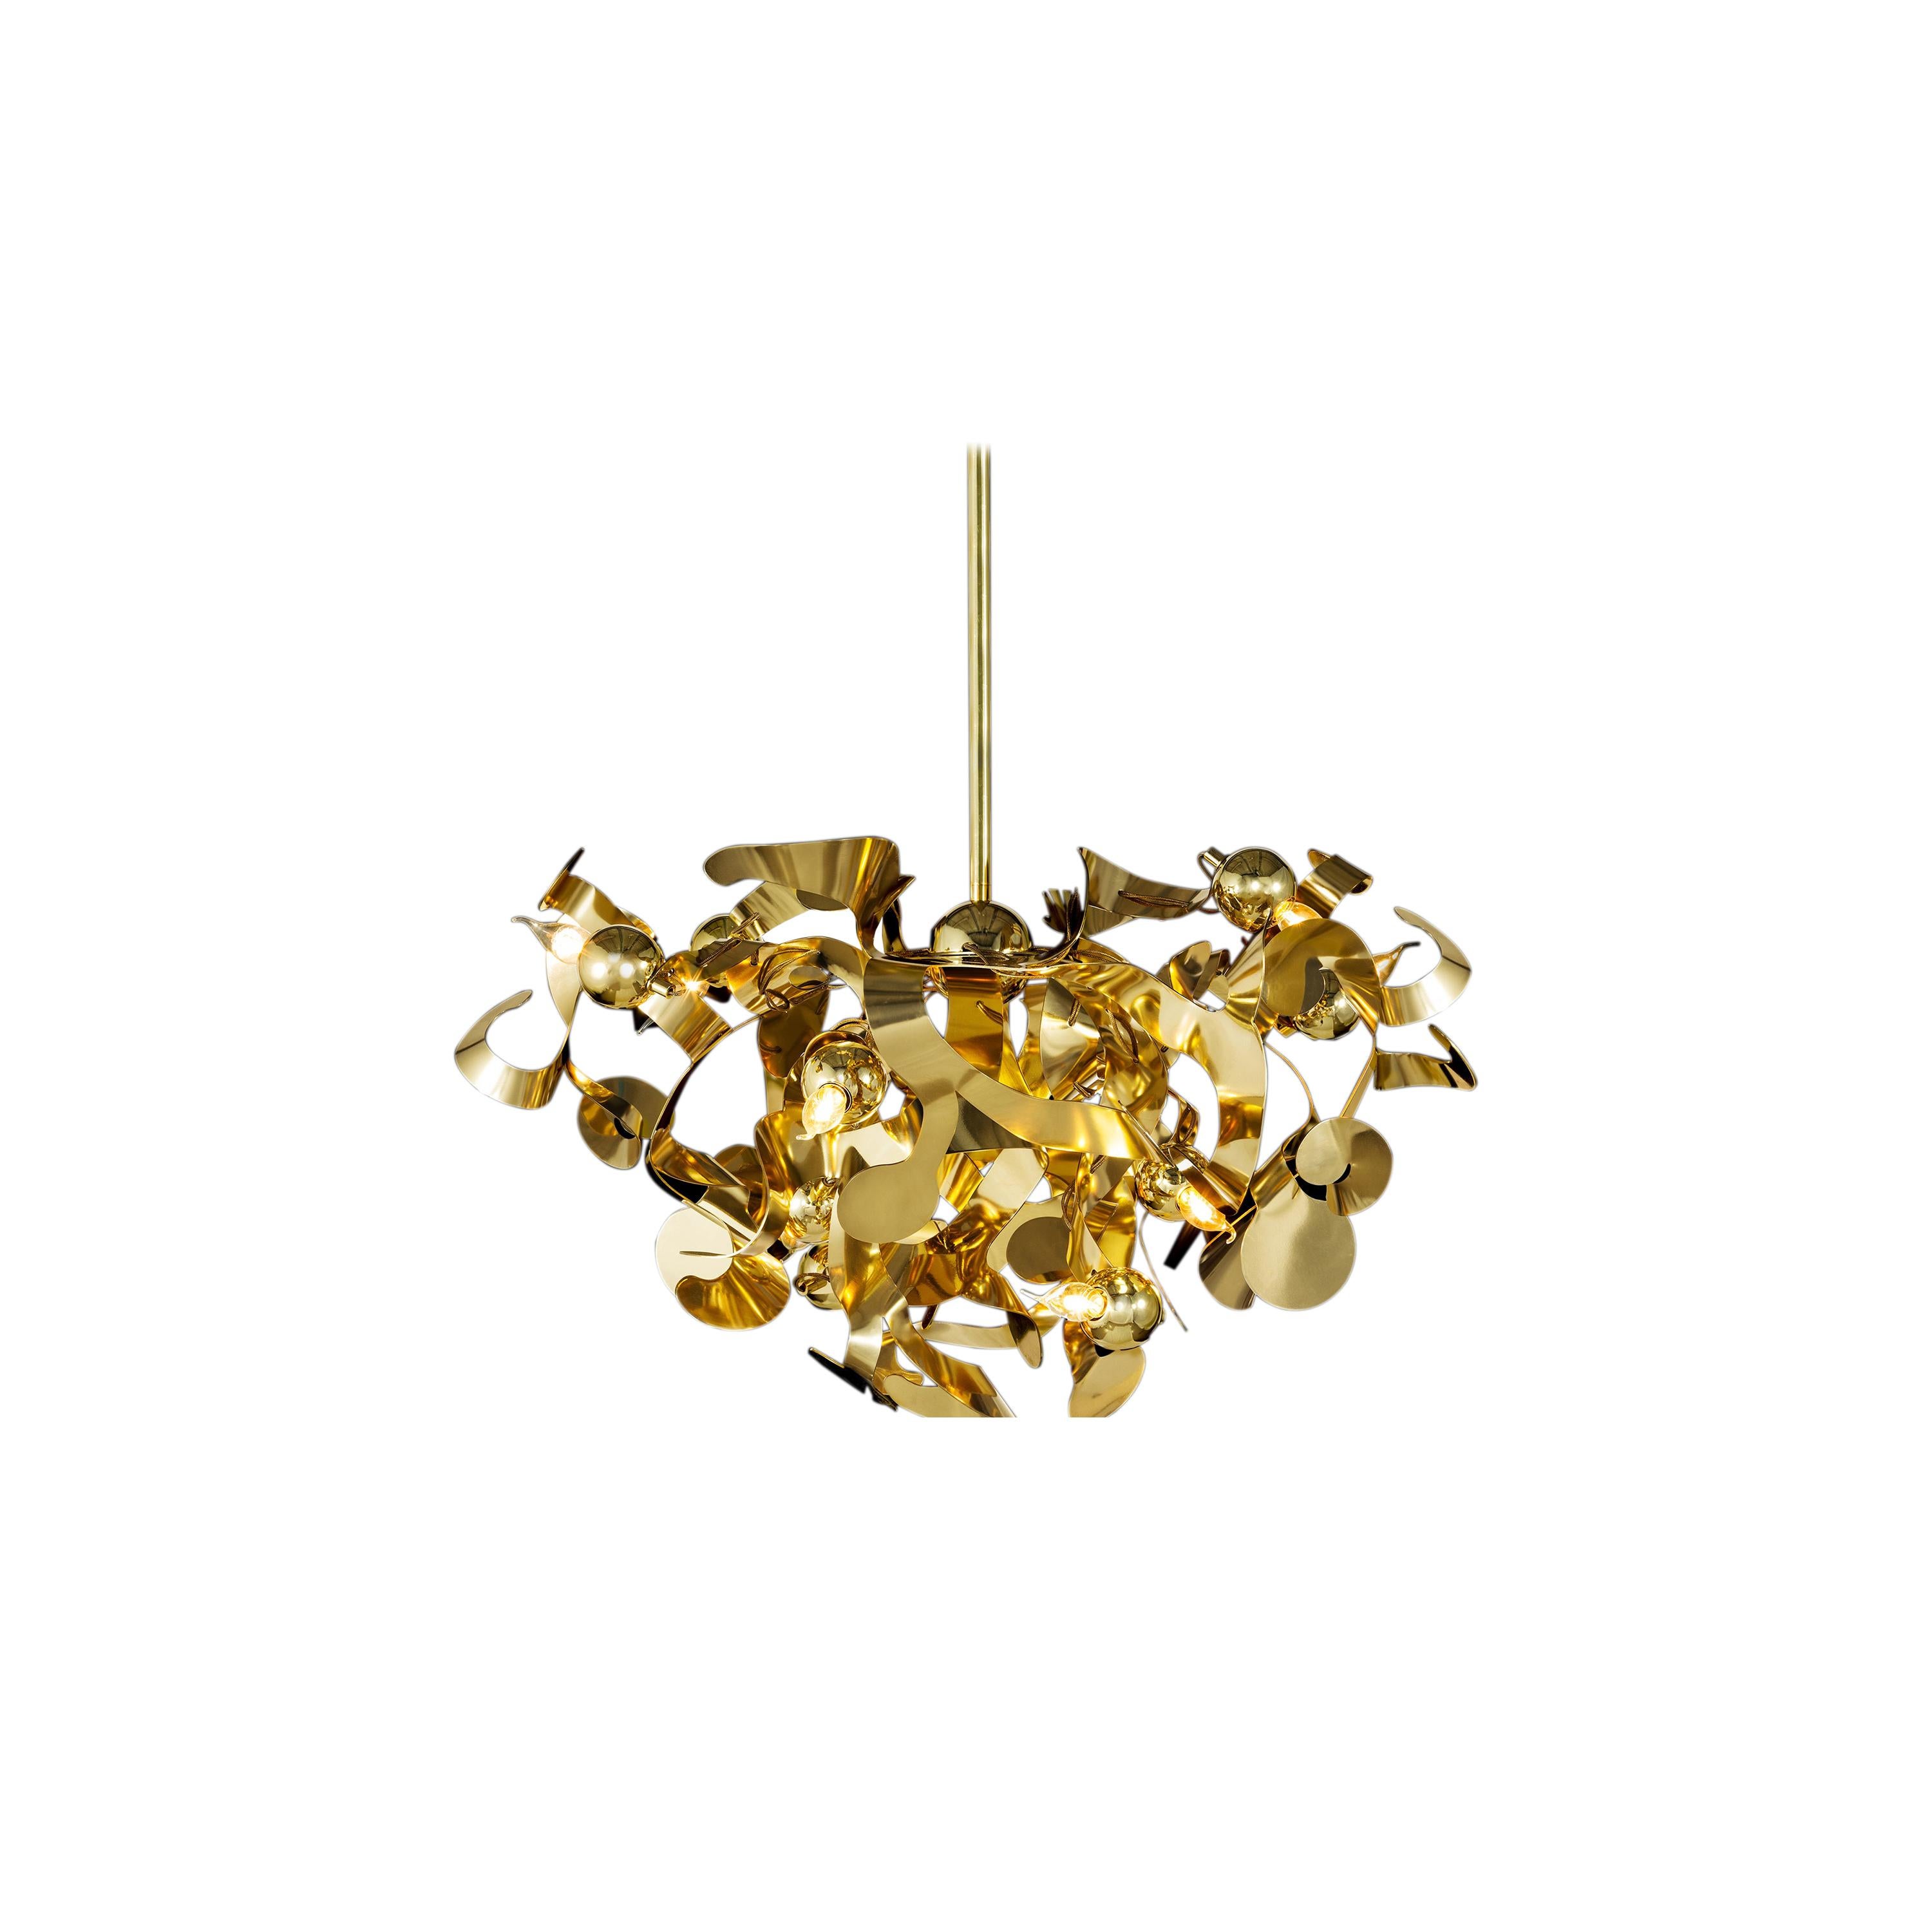 Modern Chandelier in Stainless Steel, Kelp Collection, by Brand van Egmond For Sale